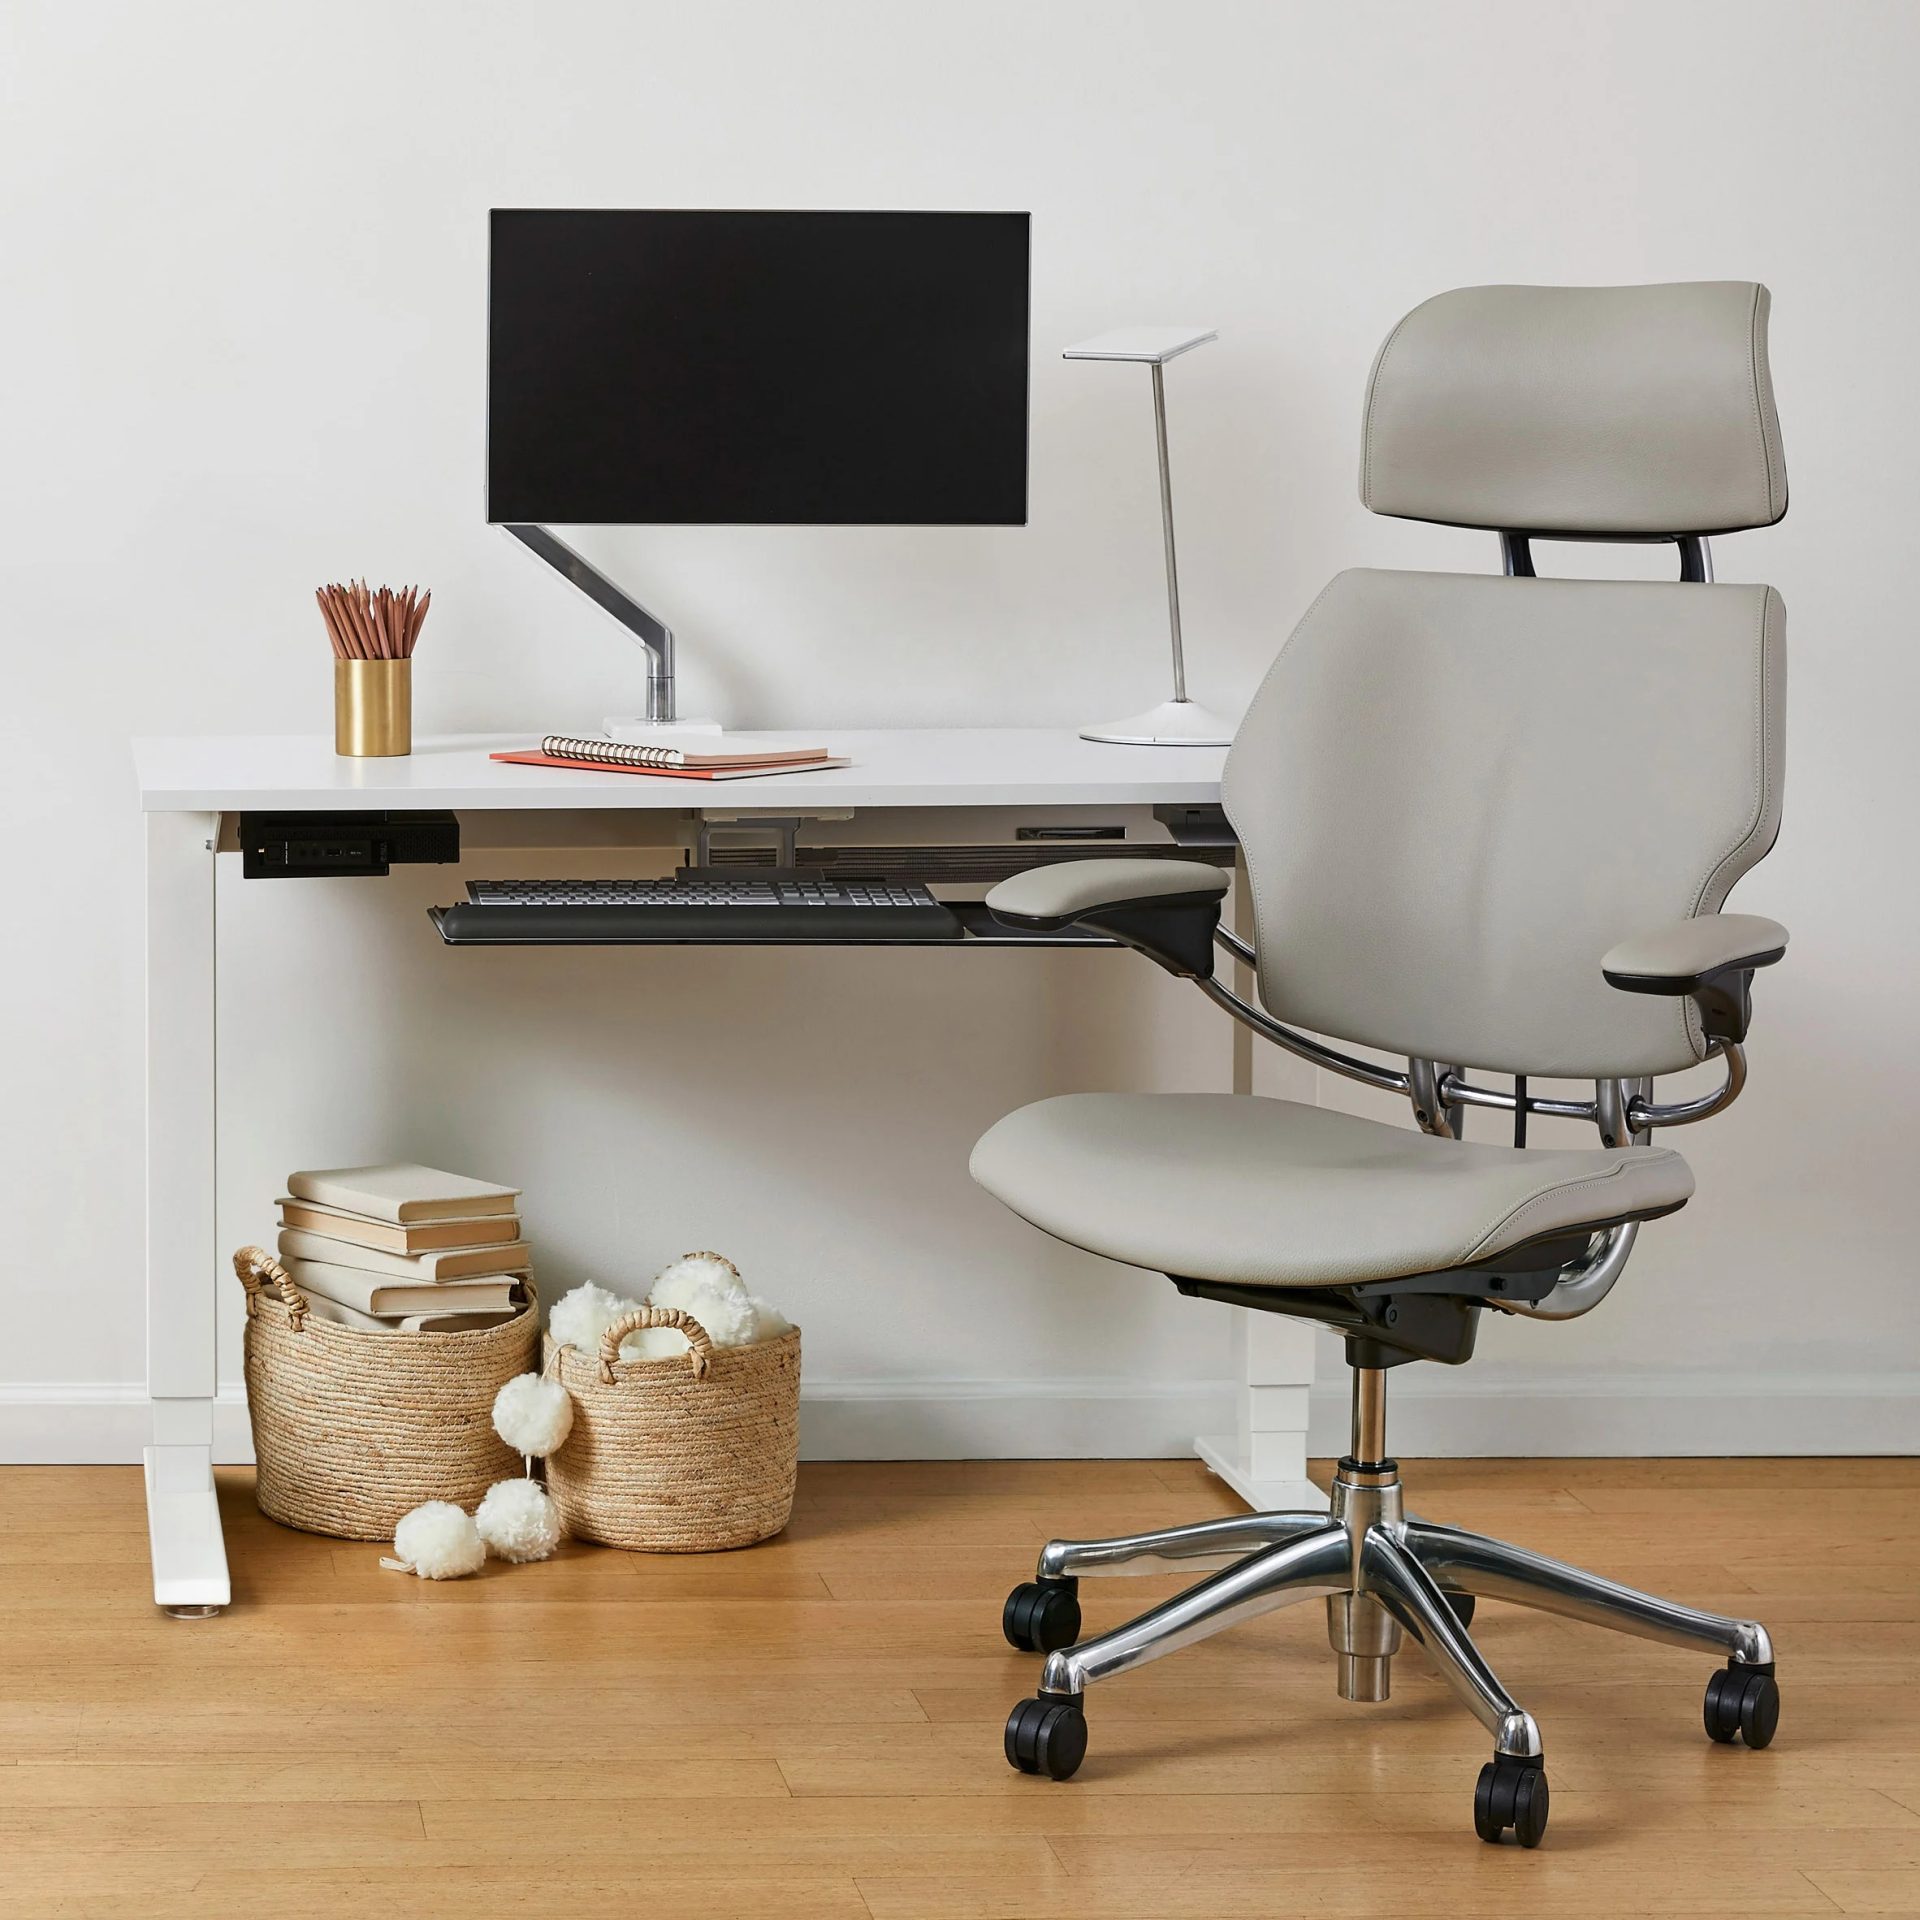 Humanscale Freedom Chair Review: Is It worth Buying?